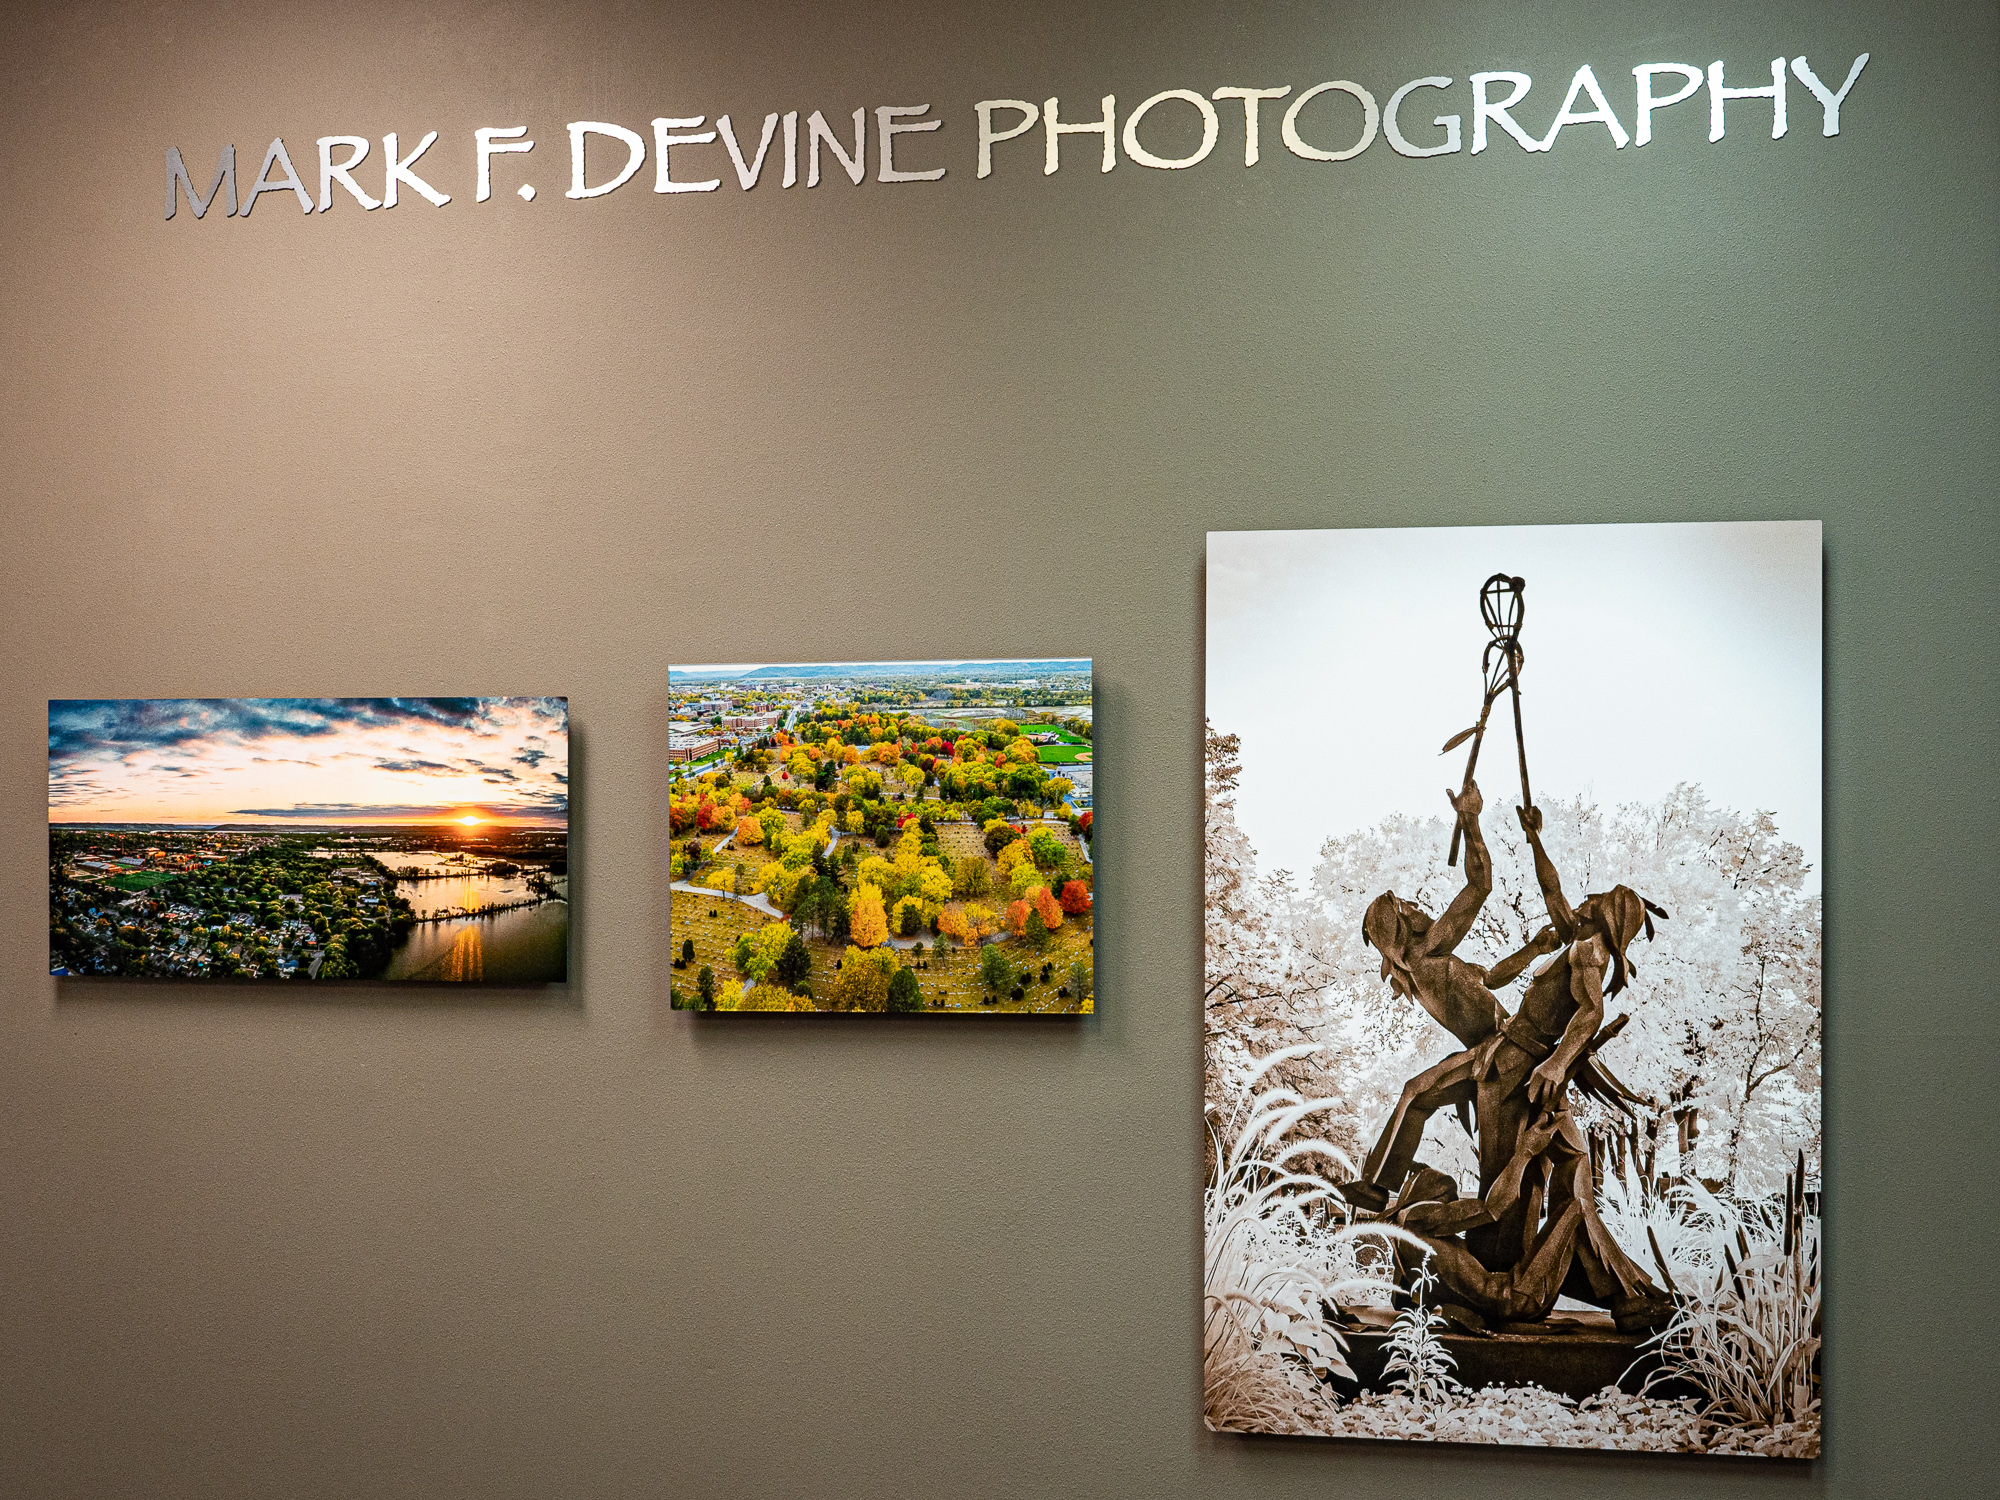 Welcome to the Mark F Devine Photography room!